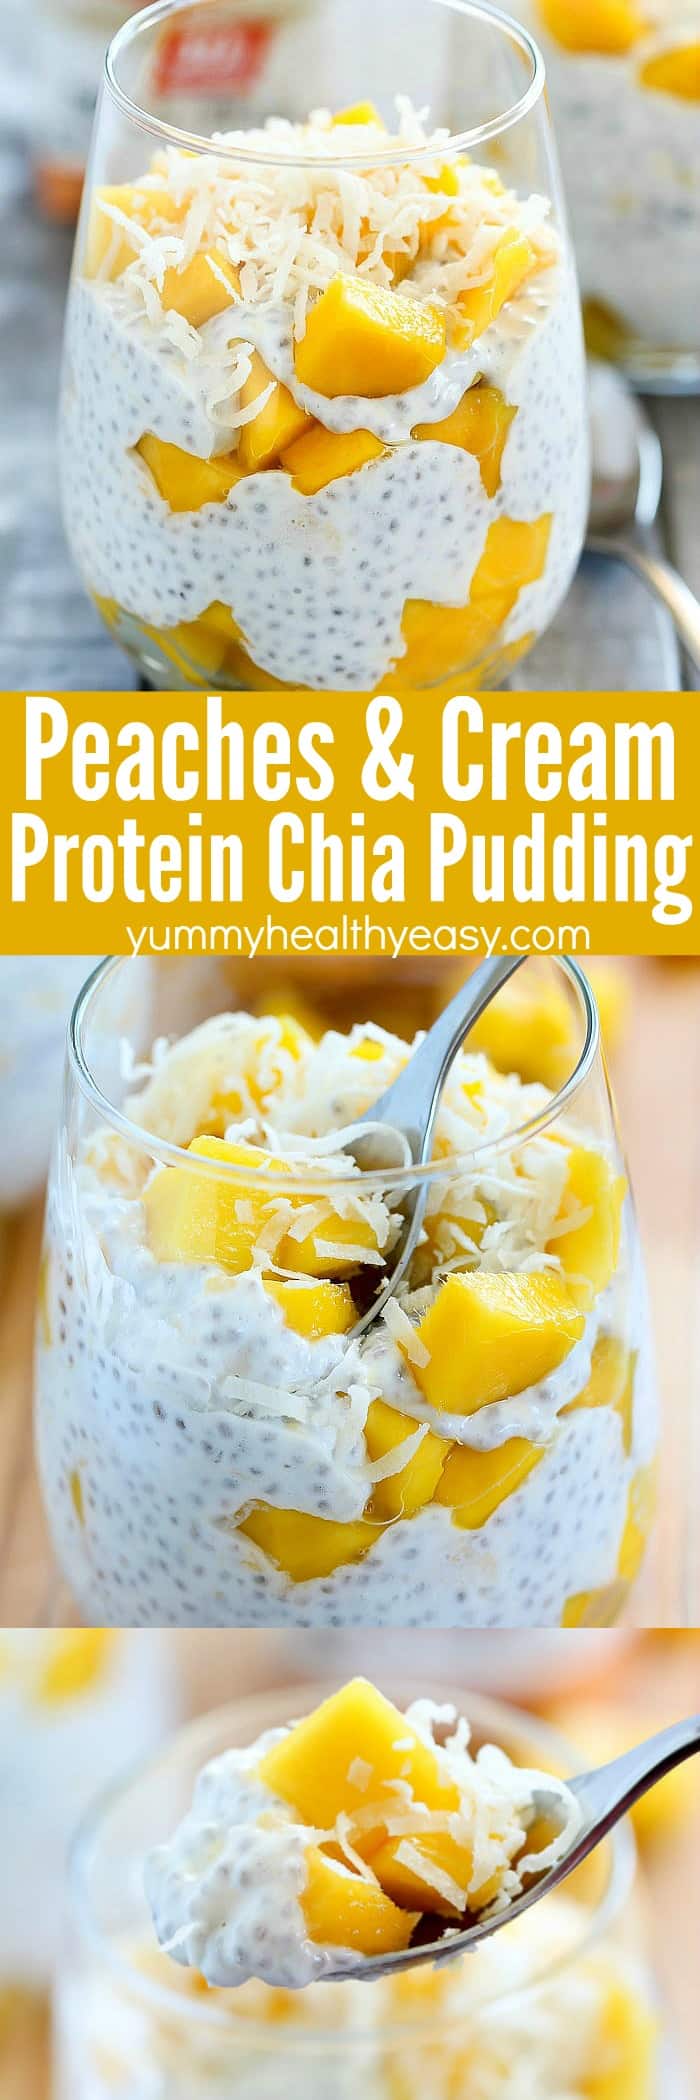 Looking for a healthy but delicious treat? Try this Peaches and Cream Protein Chia Pudding Recipe! Only 4 ingredients and SO GOOD! Filled with chia seeds, protein, greek yogurt and fruit, this chia pudding is super easy to make and delicious! You won't want to miss this super easy recipe! #chiapudding #healthydessert #healthysnack #protein #peachesandcream #lowcalorie #healthy #highprotein 